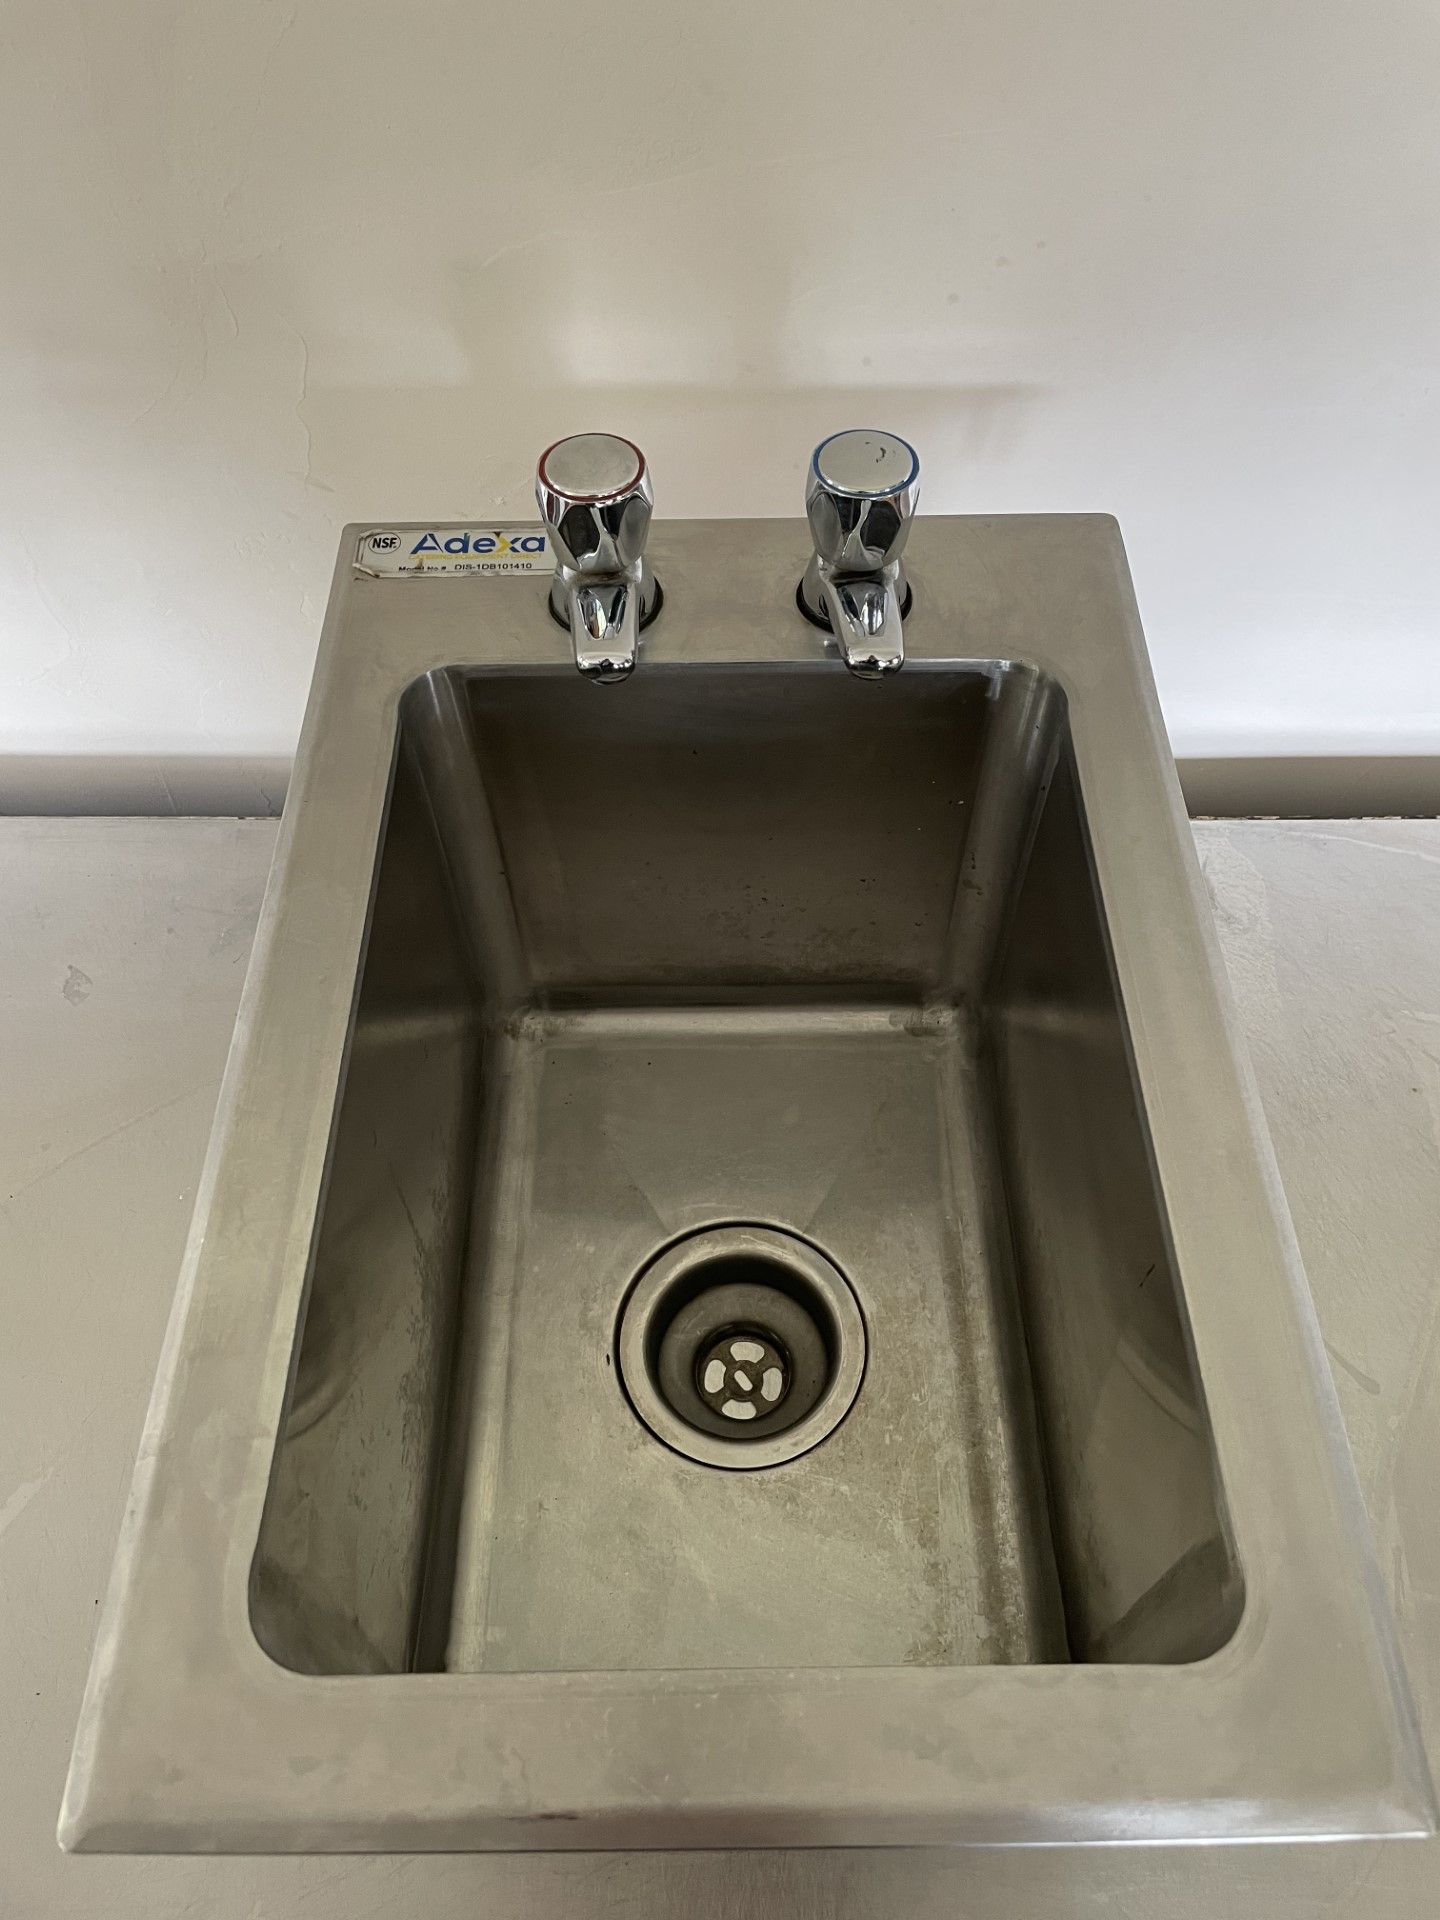 Adexa Drop-in Bar Sink. 1 Bowl. Stainless Steel with Taps. 1.3mm 304 stainless steel top. 1.0mm